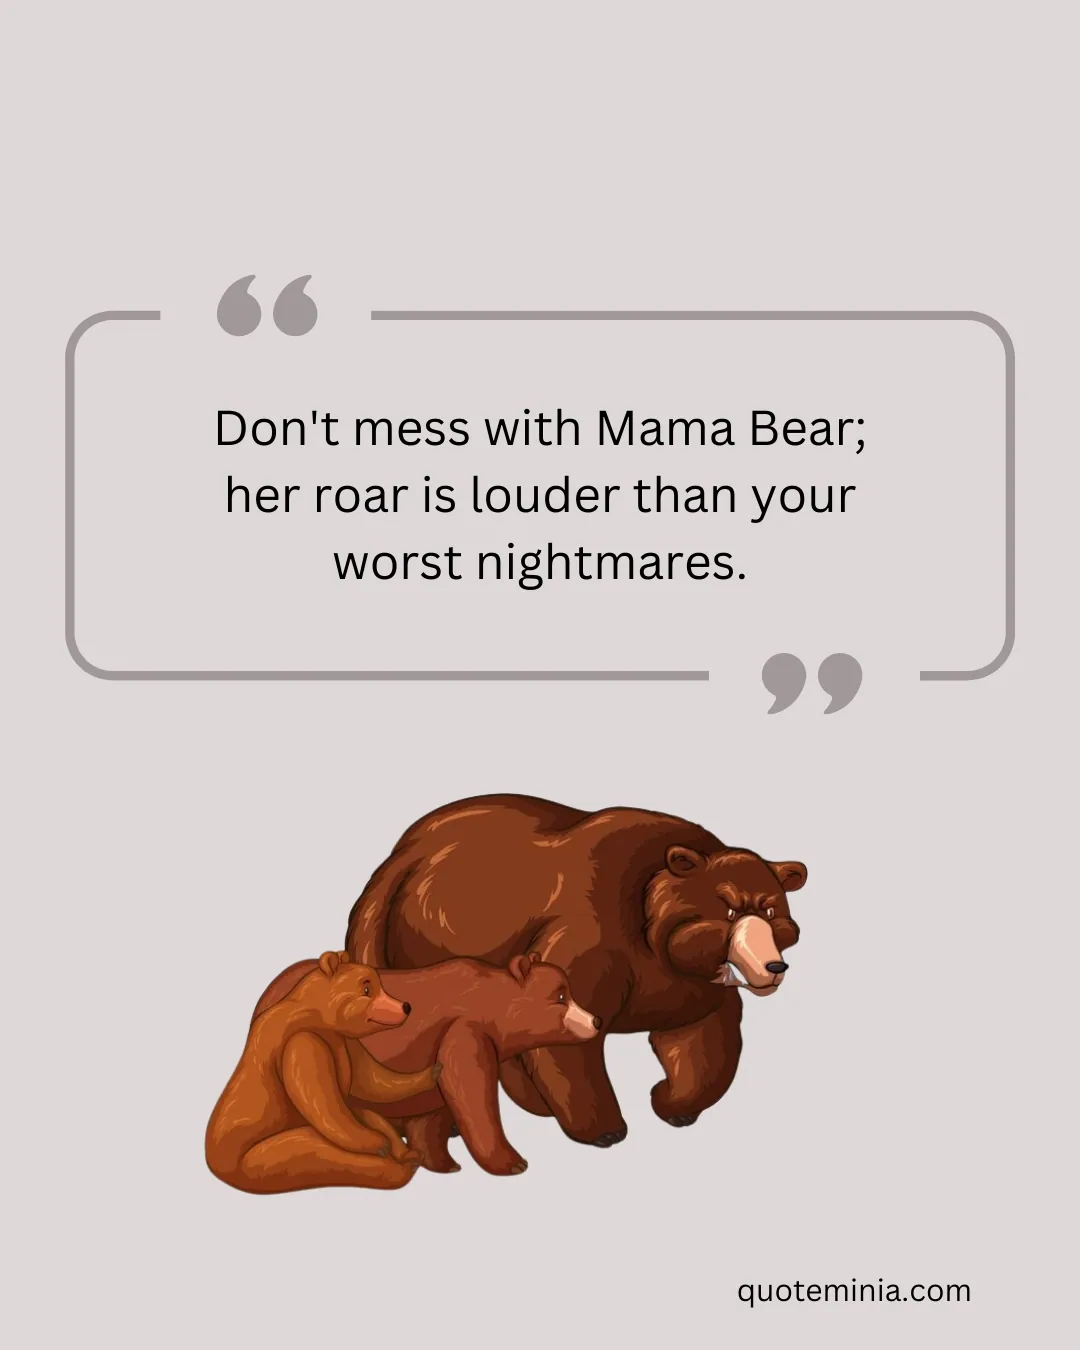 Don't Mess With Mama Bear Quotes 2